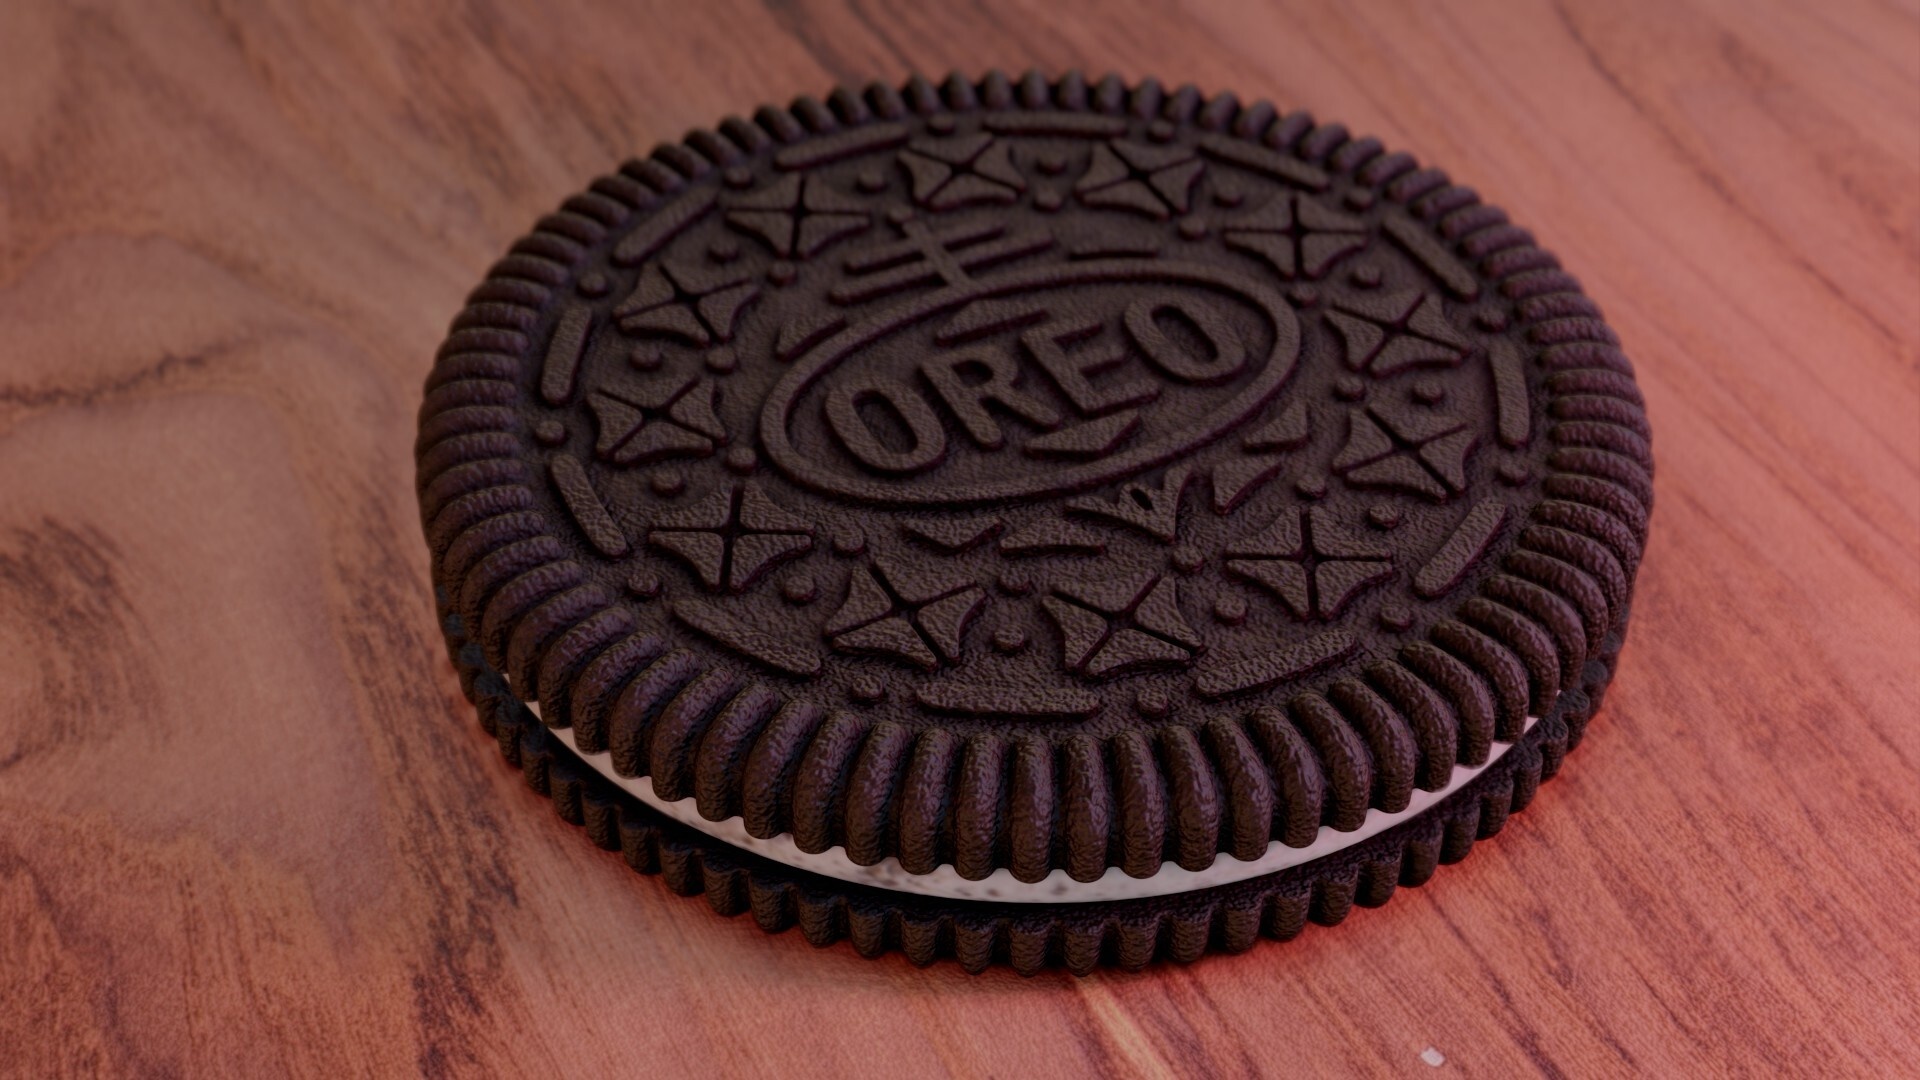 Oreo Cookies: Offers more than forty sandwich cookie products. 1920x1080 Full HD Wallpaper.